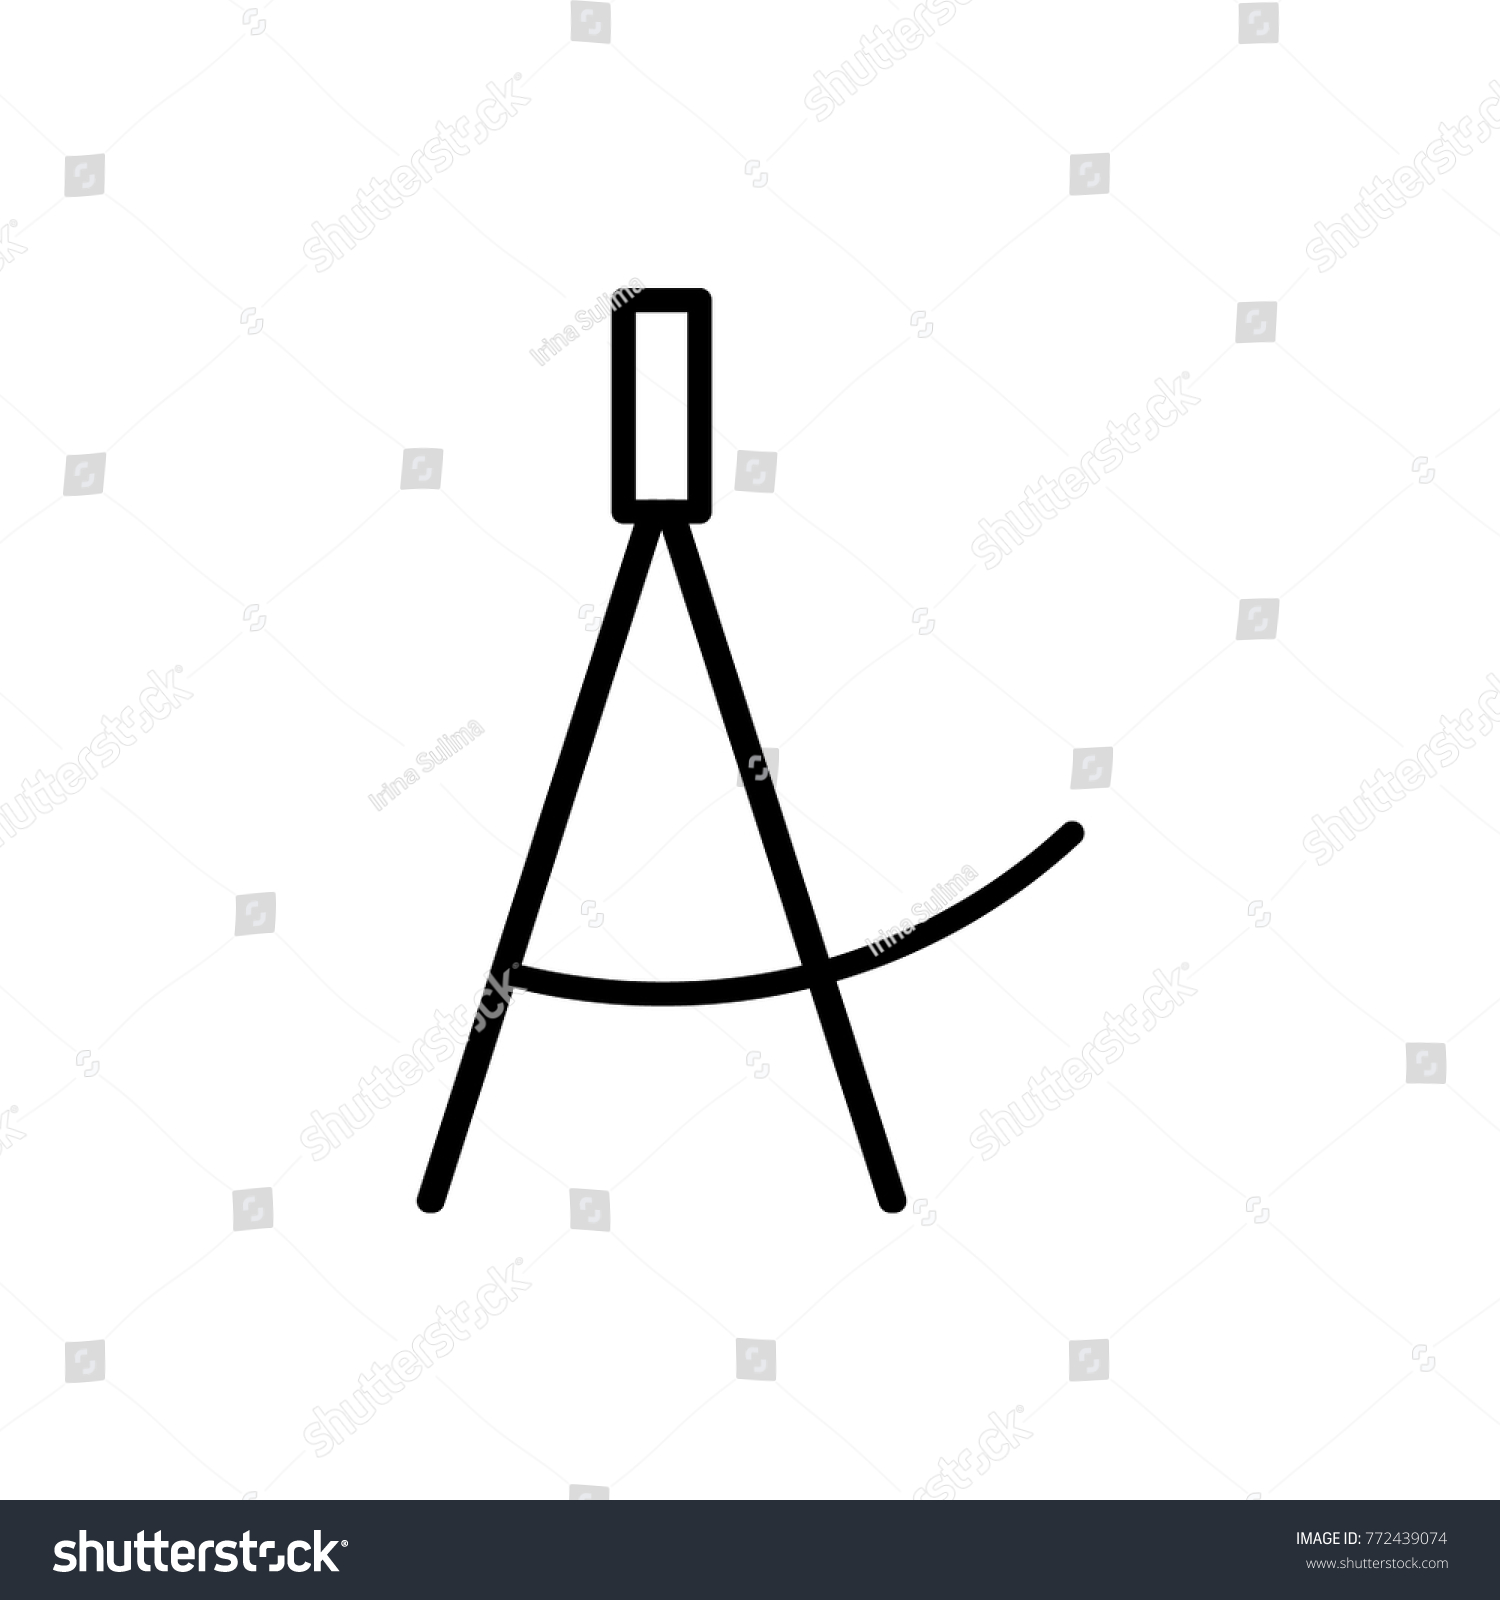 Drawing Compasses Vector Icon Stock Vector 772439074 - Shutterstock